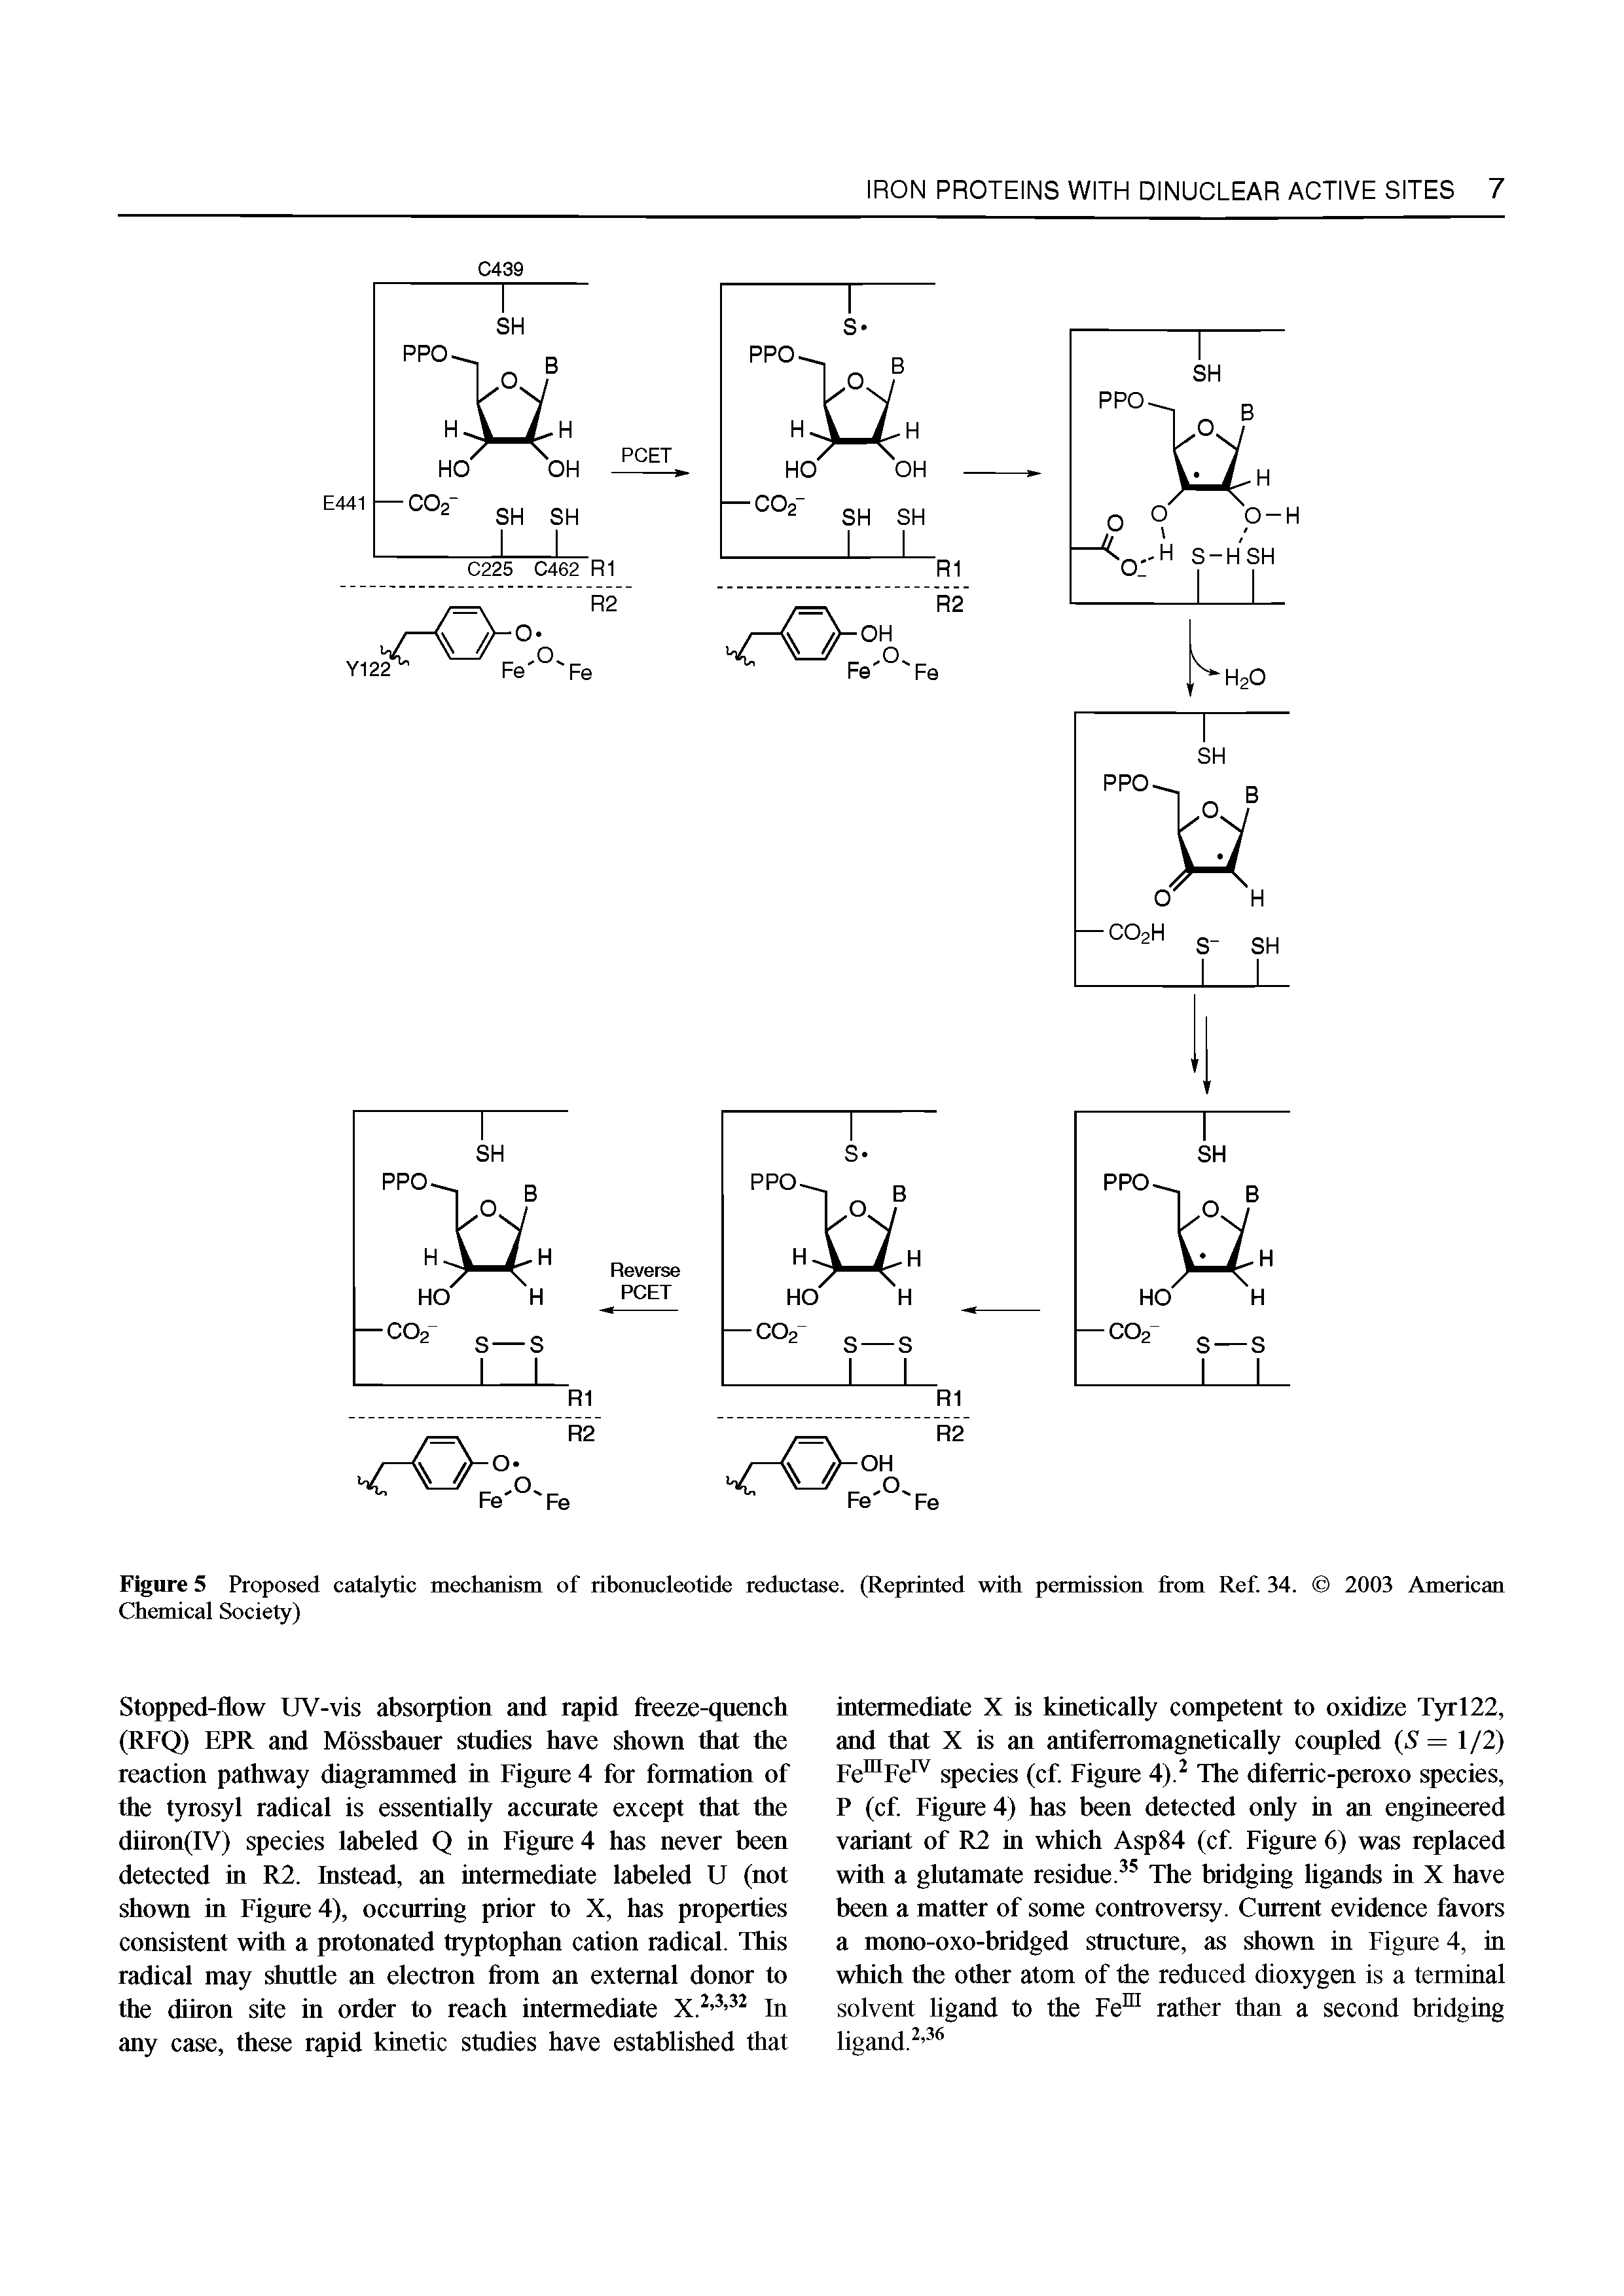 Figure 5 Proposed catal)dic mechanism of ribonucleotide reductase. (Reprinted with permission from Ref. 34. Chemical Society)...